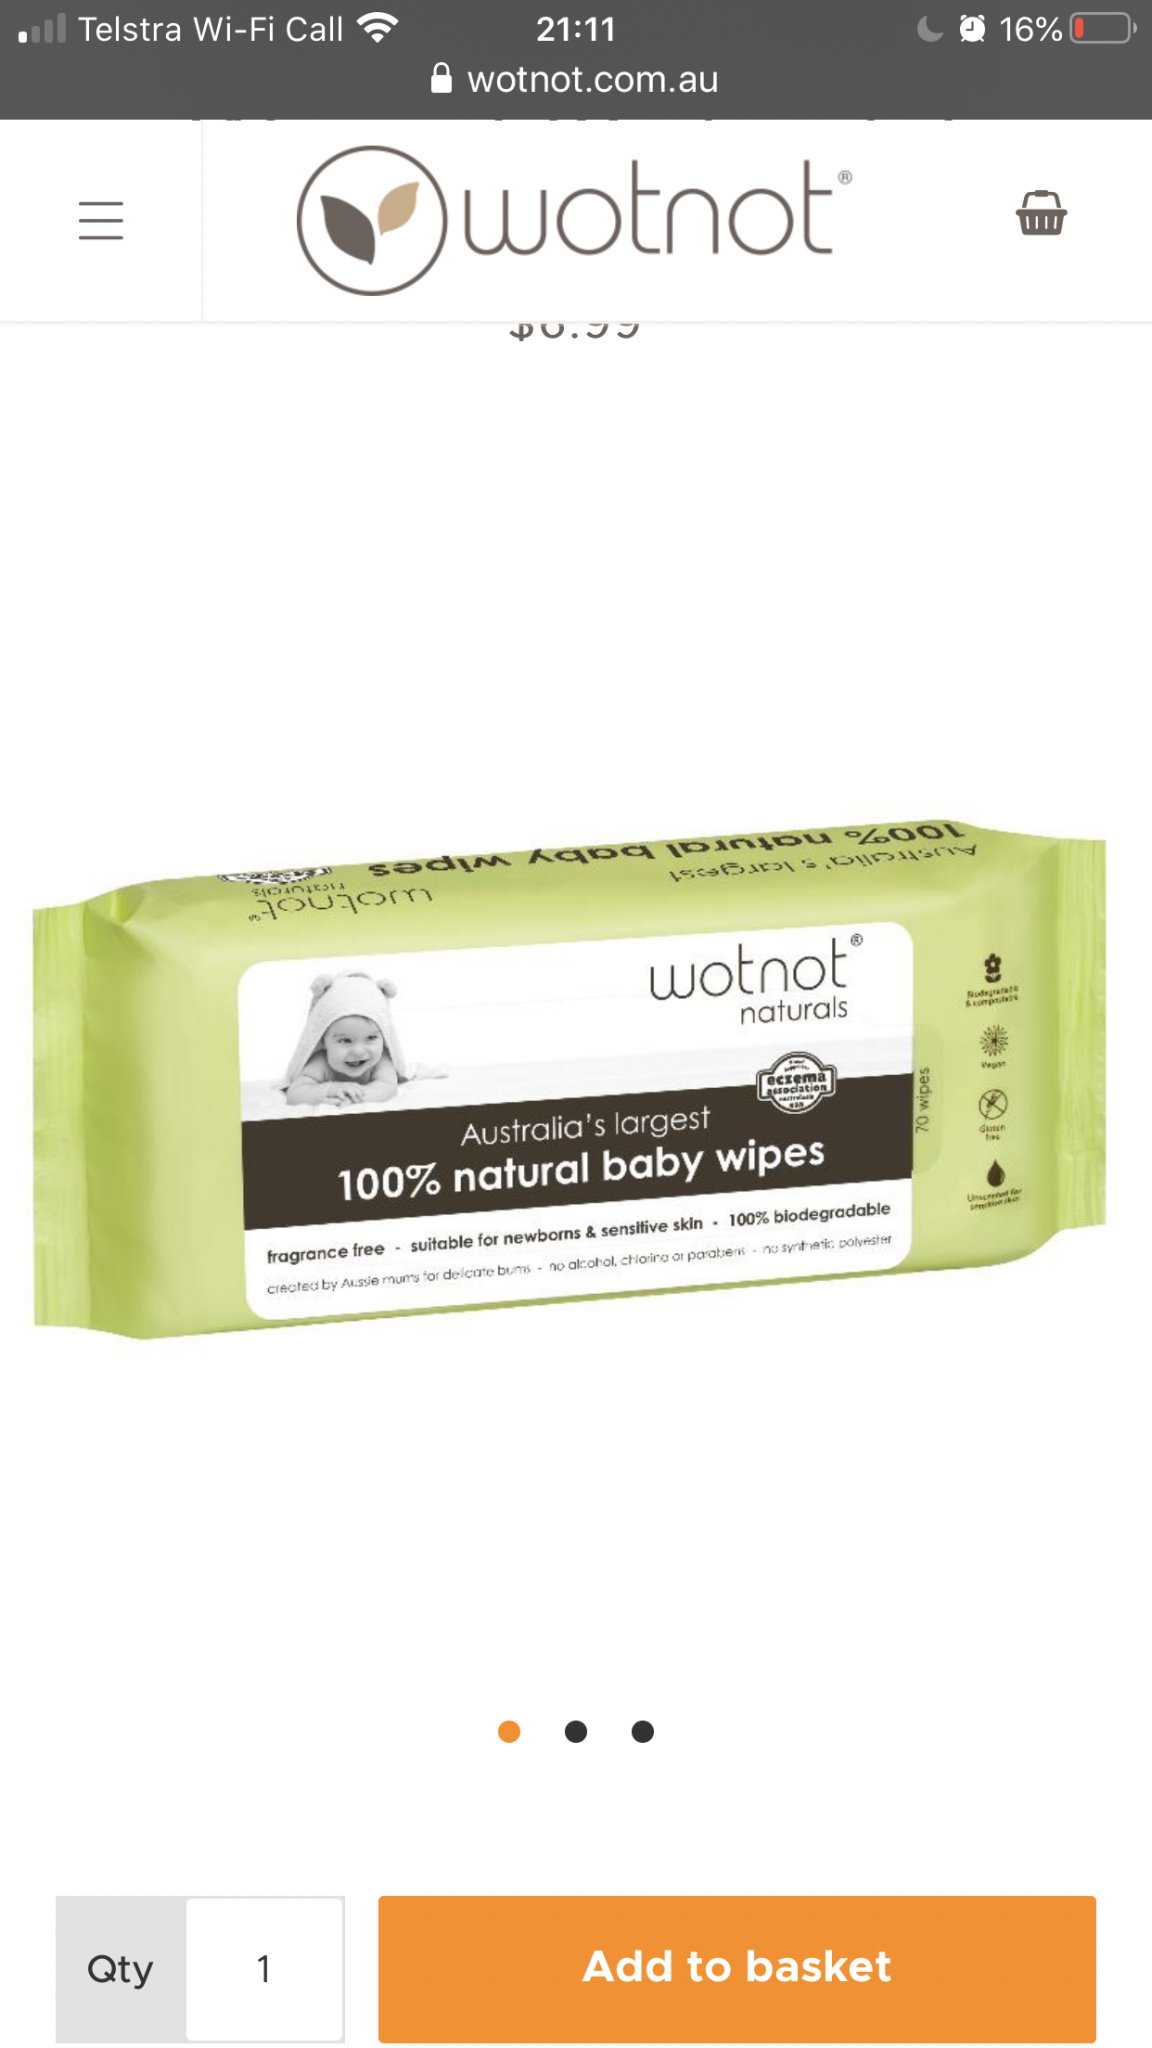 Natural/eco Baby wipes and disposable nappies all sizes